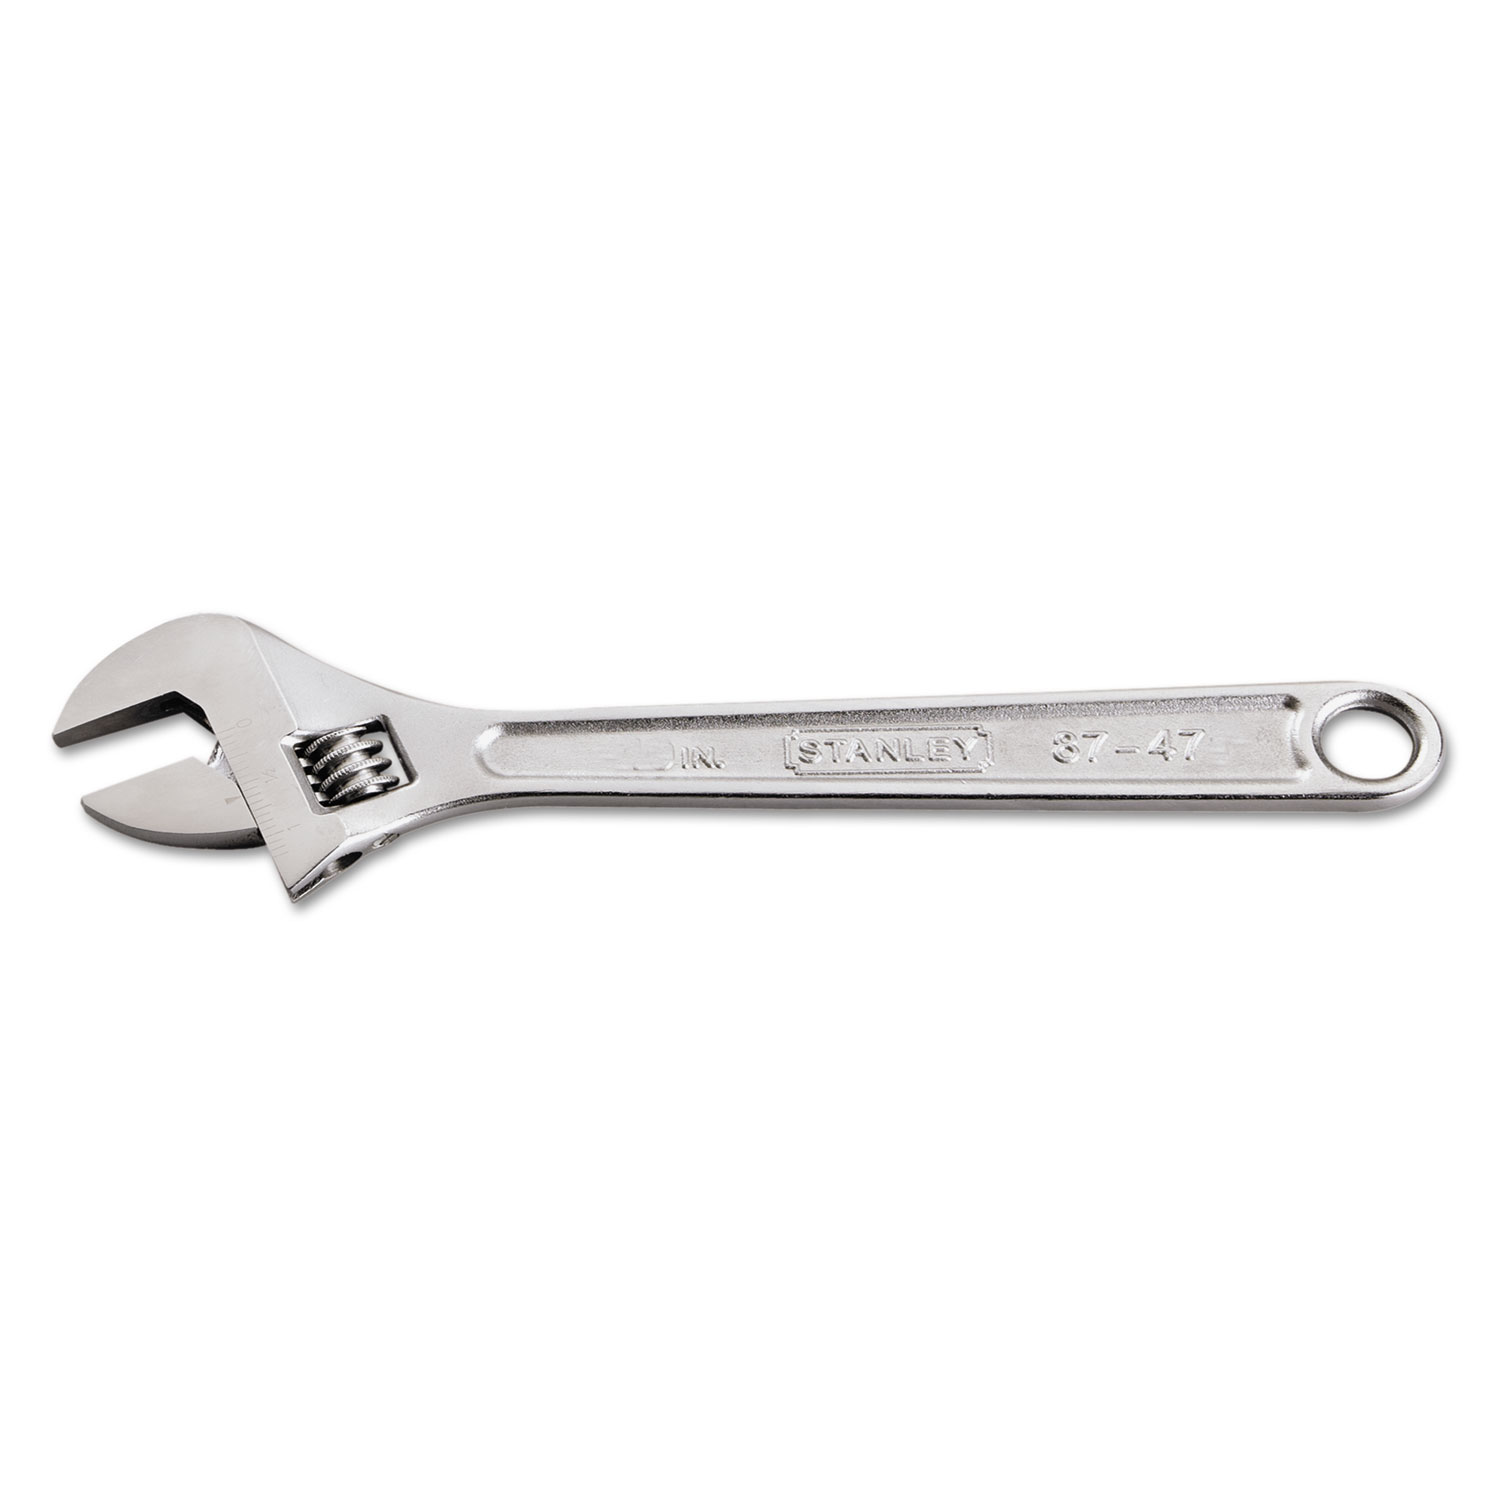 Stanley Tools Adjustable Wrench, 12 Long, 1 3/8 Opening, Chrome